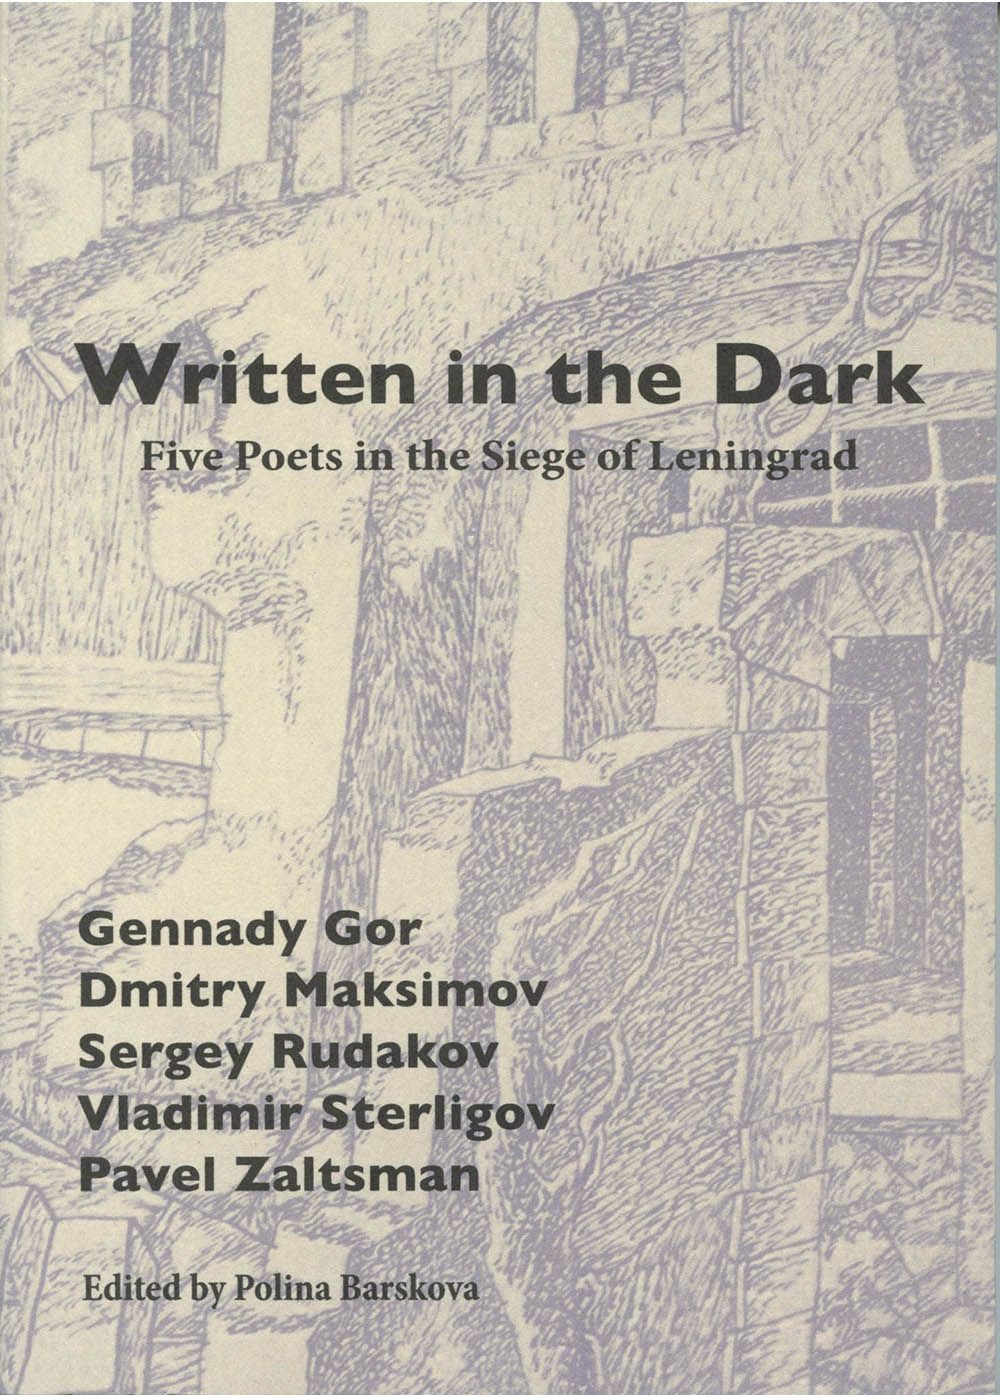 Making Meaning Under the Siege: On Five Leningrad Poets